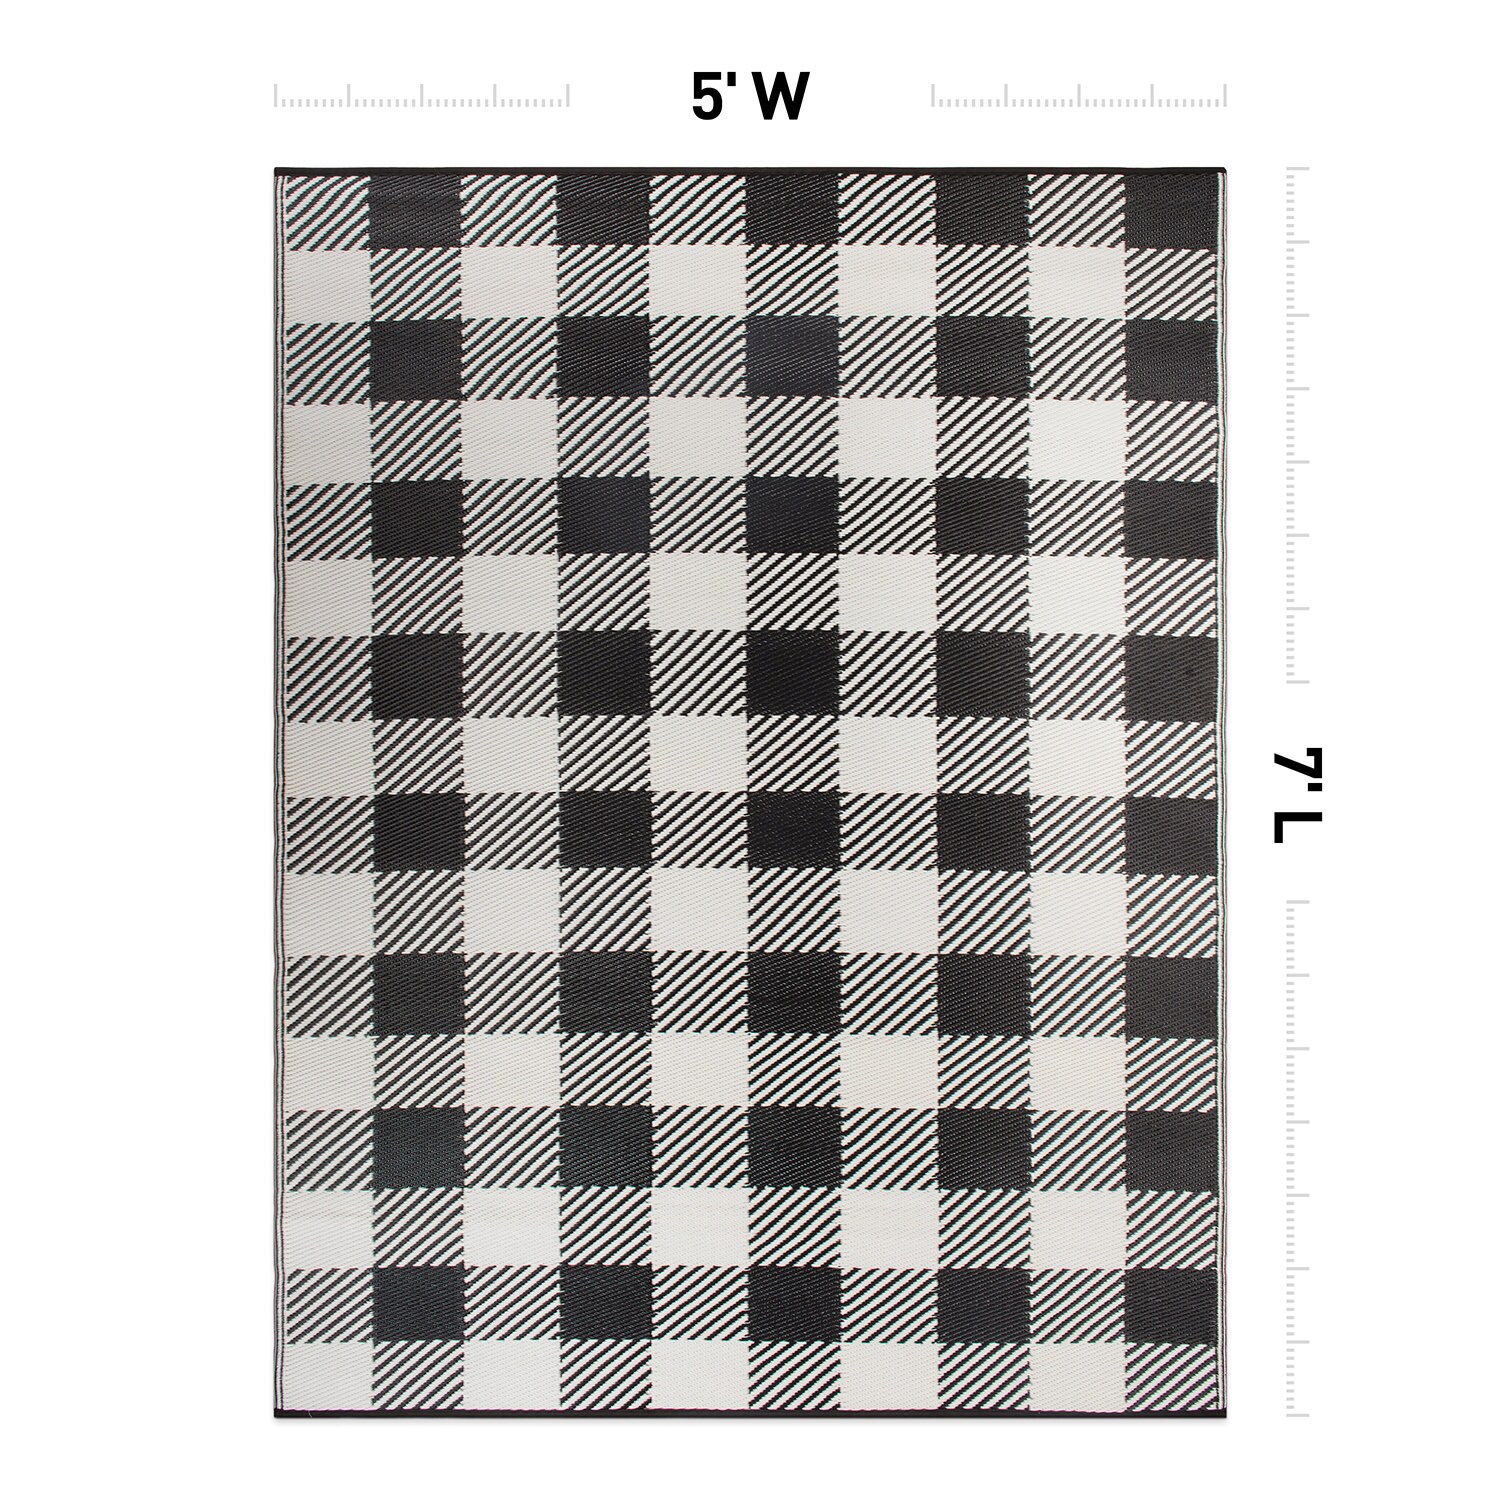 Set of 2 Halloween bar towels black and white buffalo plaid October 31  kitchen